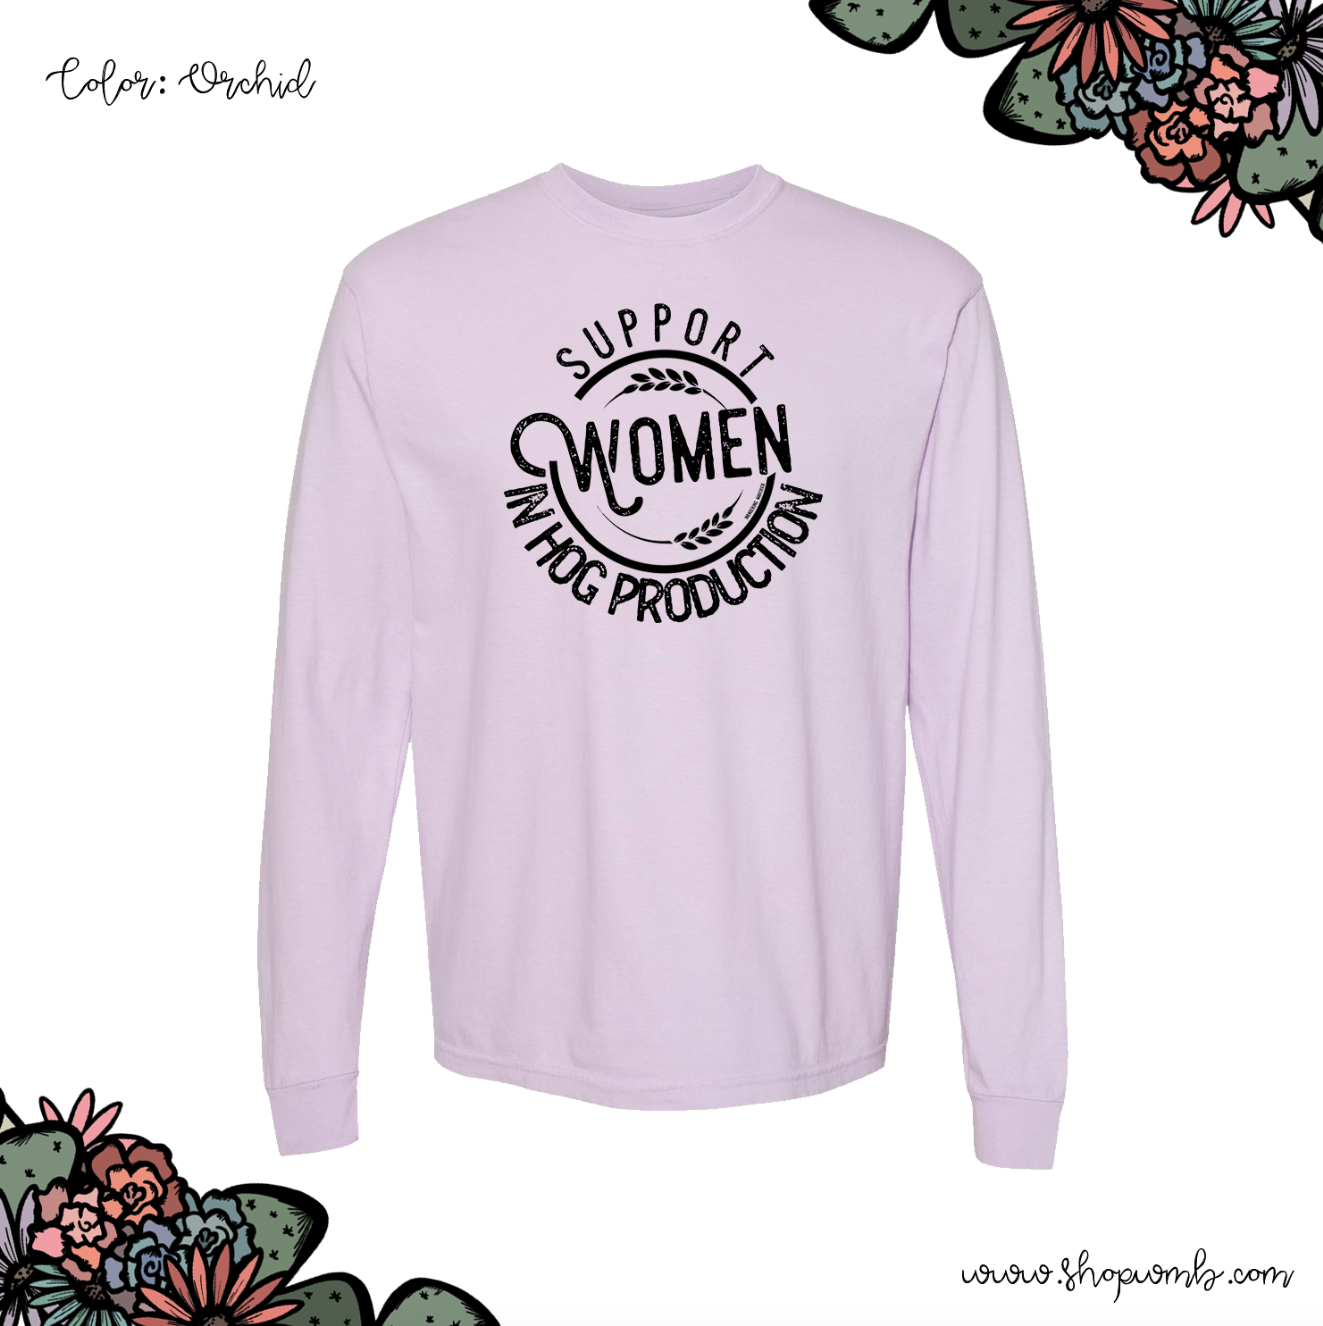 Support Women In Hog Production LONG SLEEVE T-Shirt (S-3XL) - Multiple Colors!